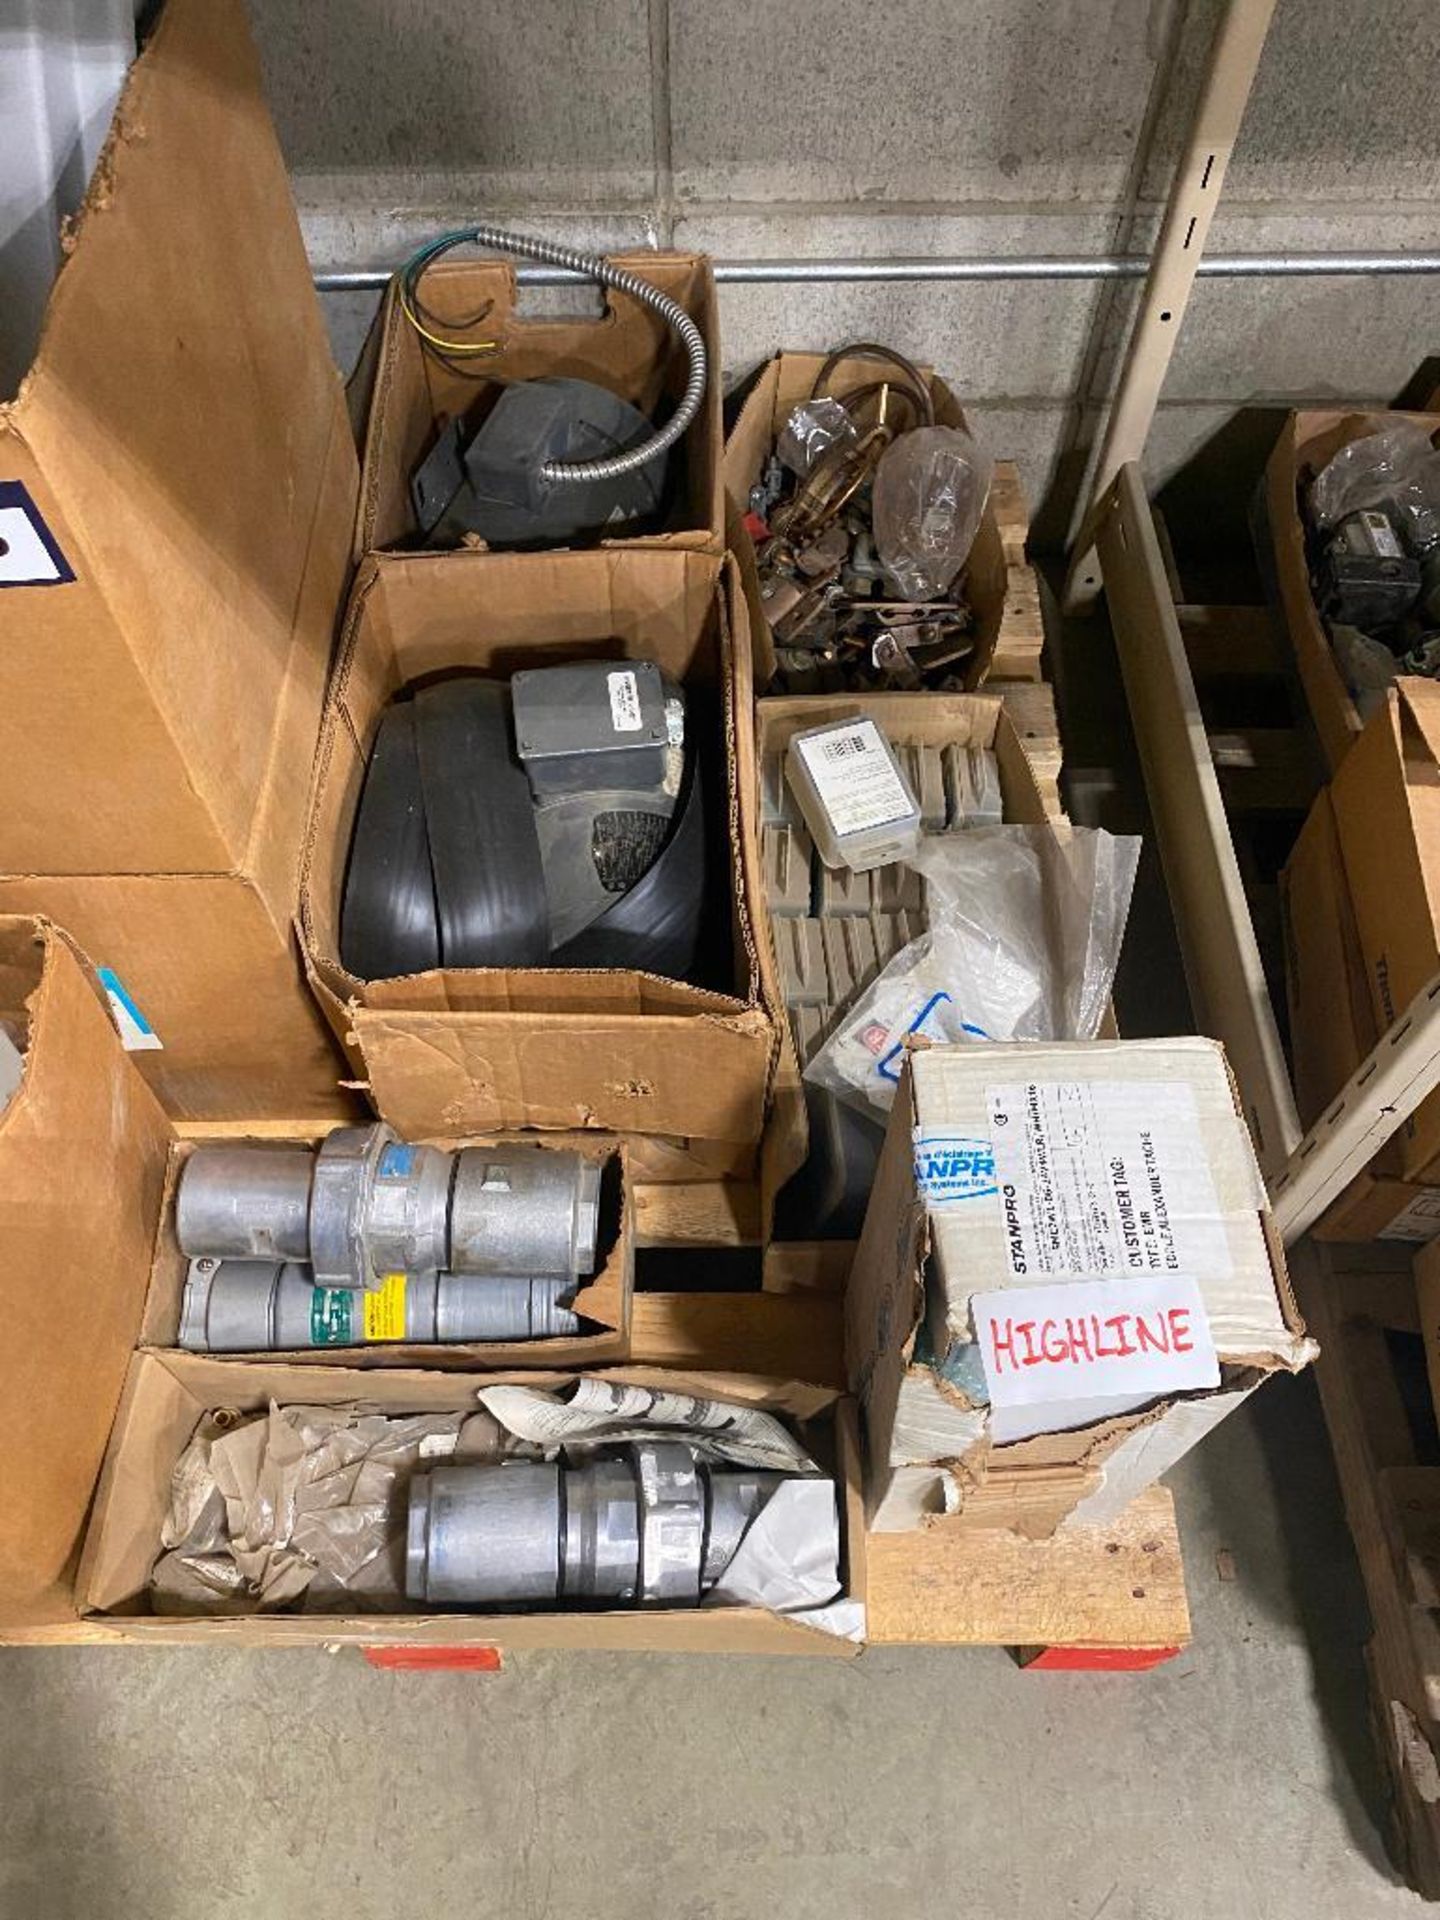 Pallet of Asst. Electrical including Enclosures, Connectors, Lighting, Electric Motor, etc. - Image 2 of 3